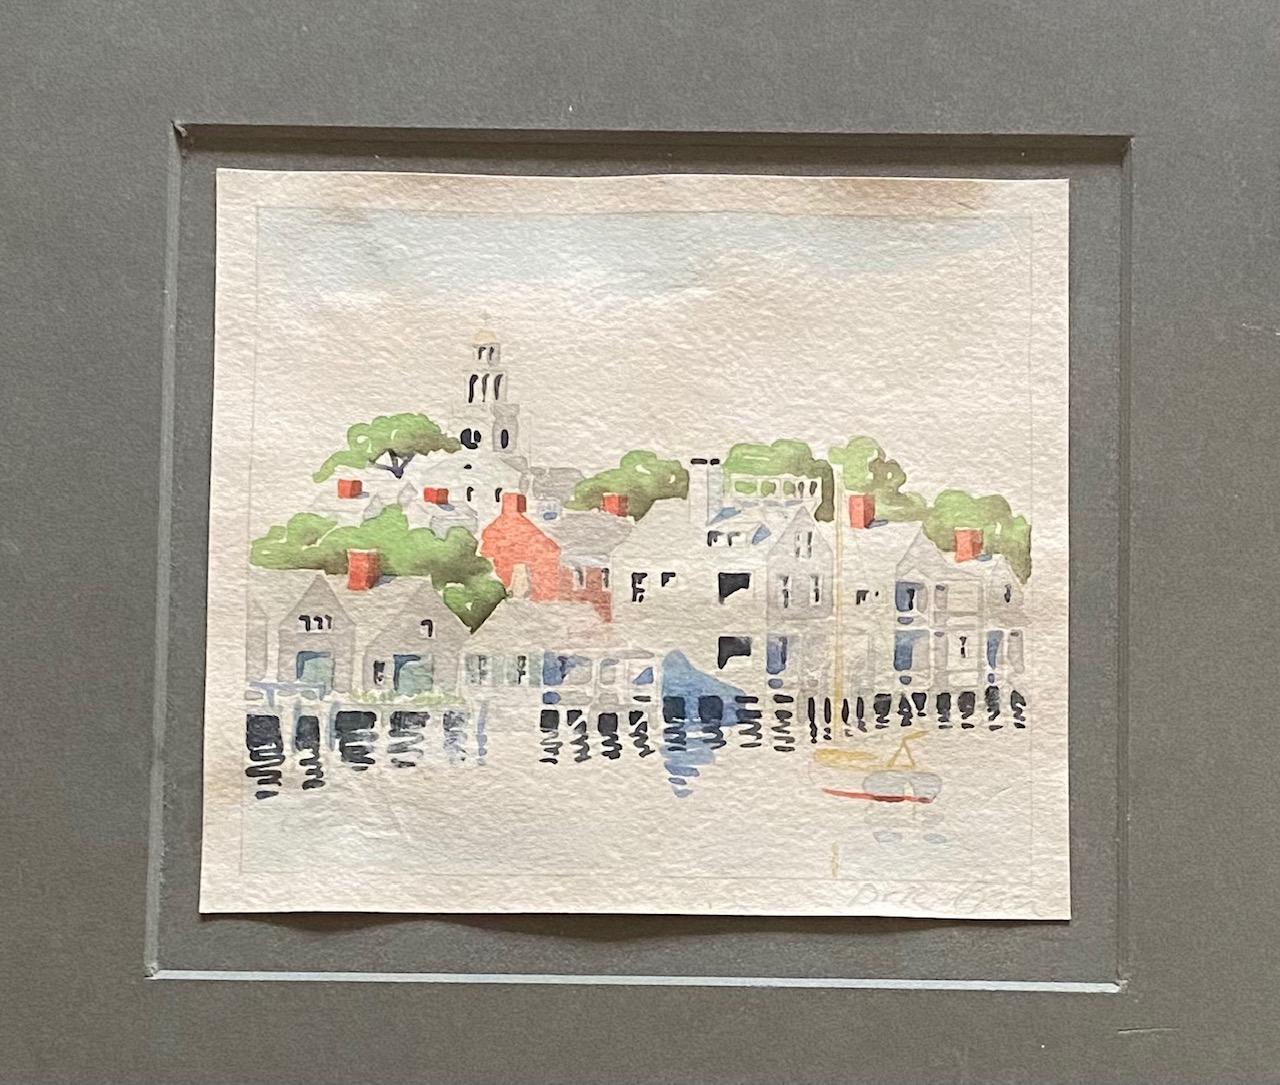 Vintage Nantucket Old North Slip watercolor by Doris & Richard Beer, circa 1940, a watercolor on paper view of Old North Slip (Wharf), signed in pencil power right. Doris and Richard Beer (1898-1967 and 1893-1959 respectively) produced a well-known